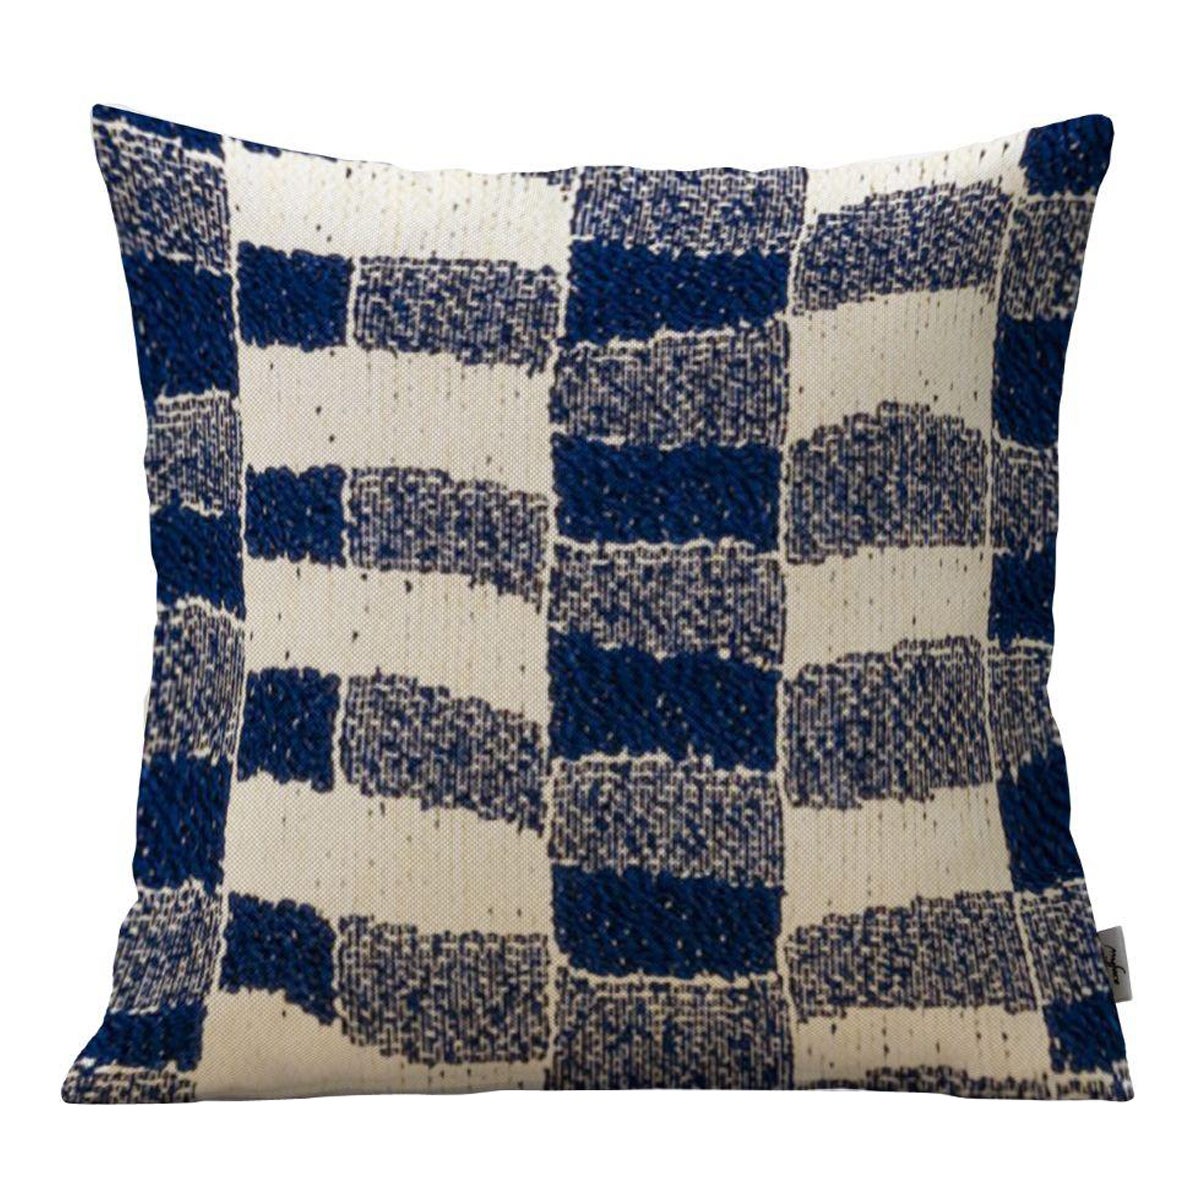 Blue Waterproof Outdoor Pillow with Pattern